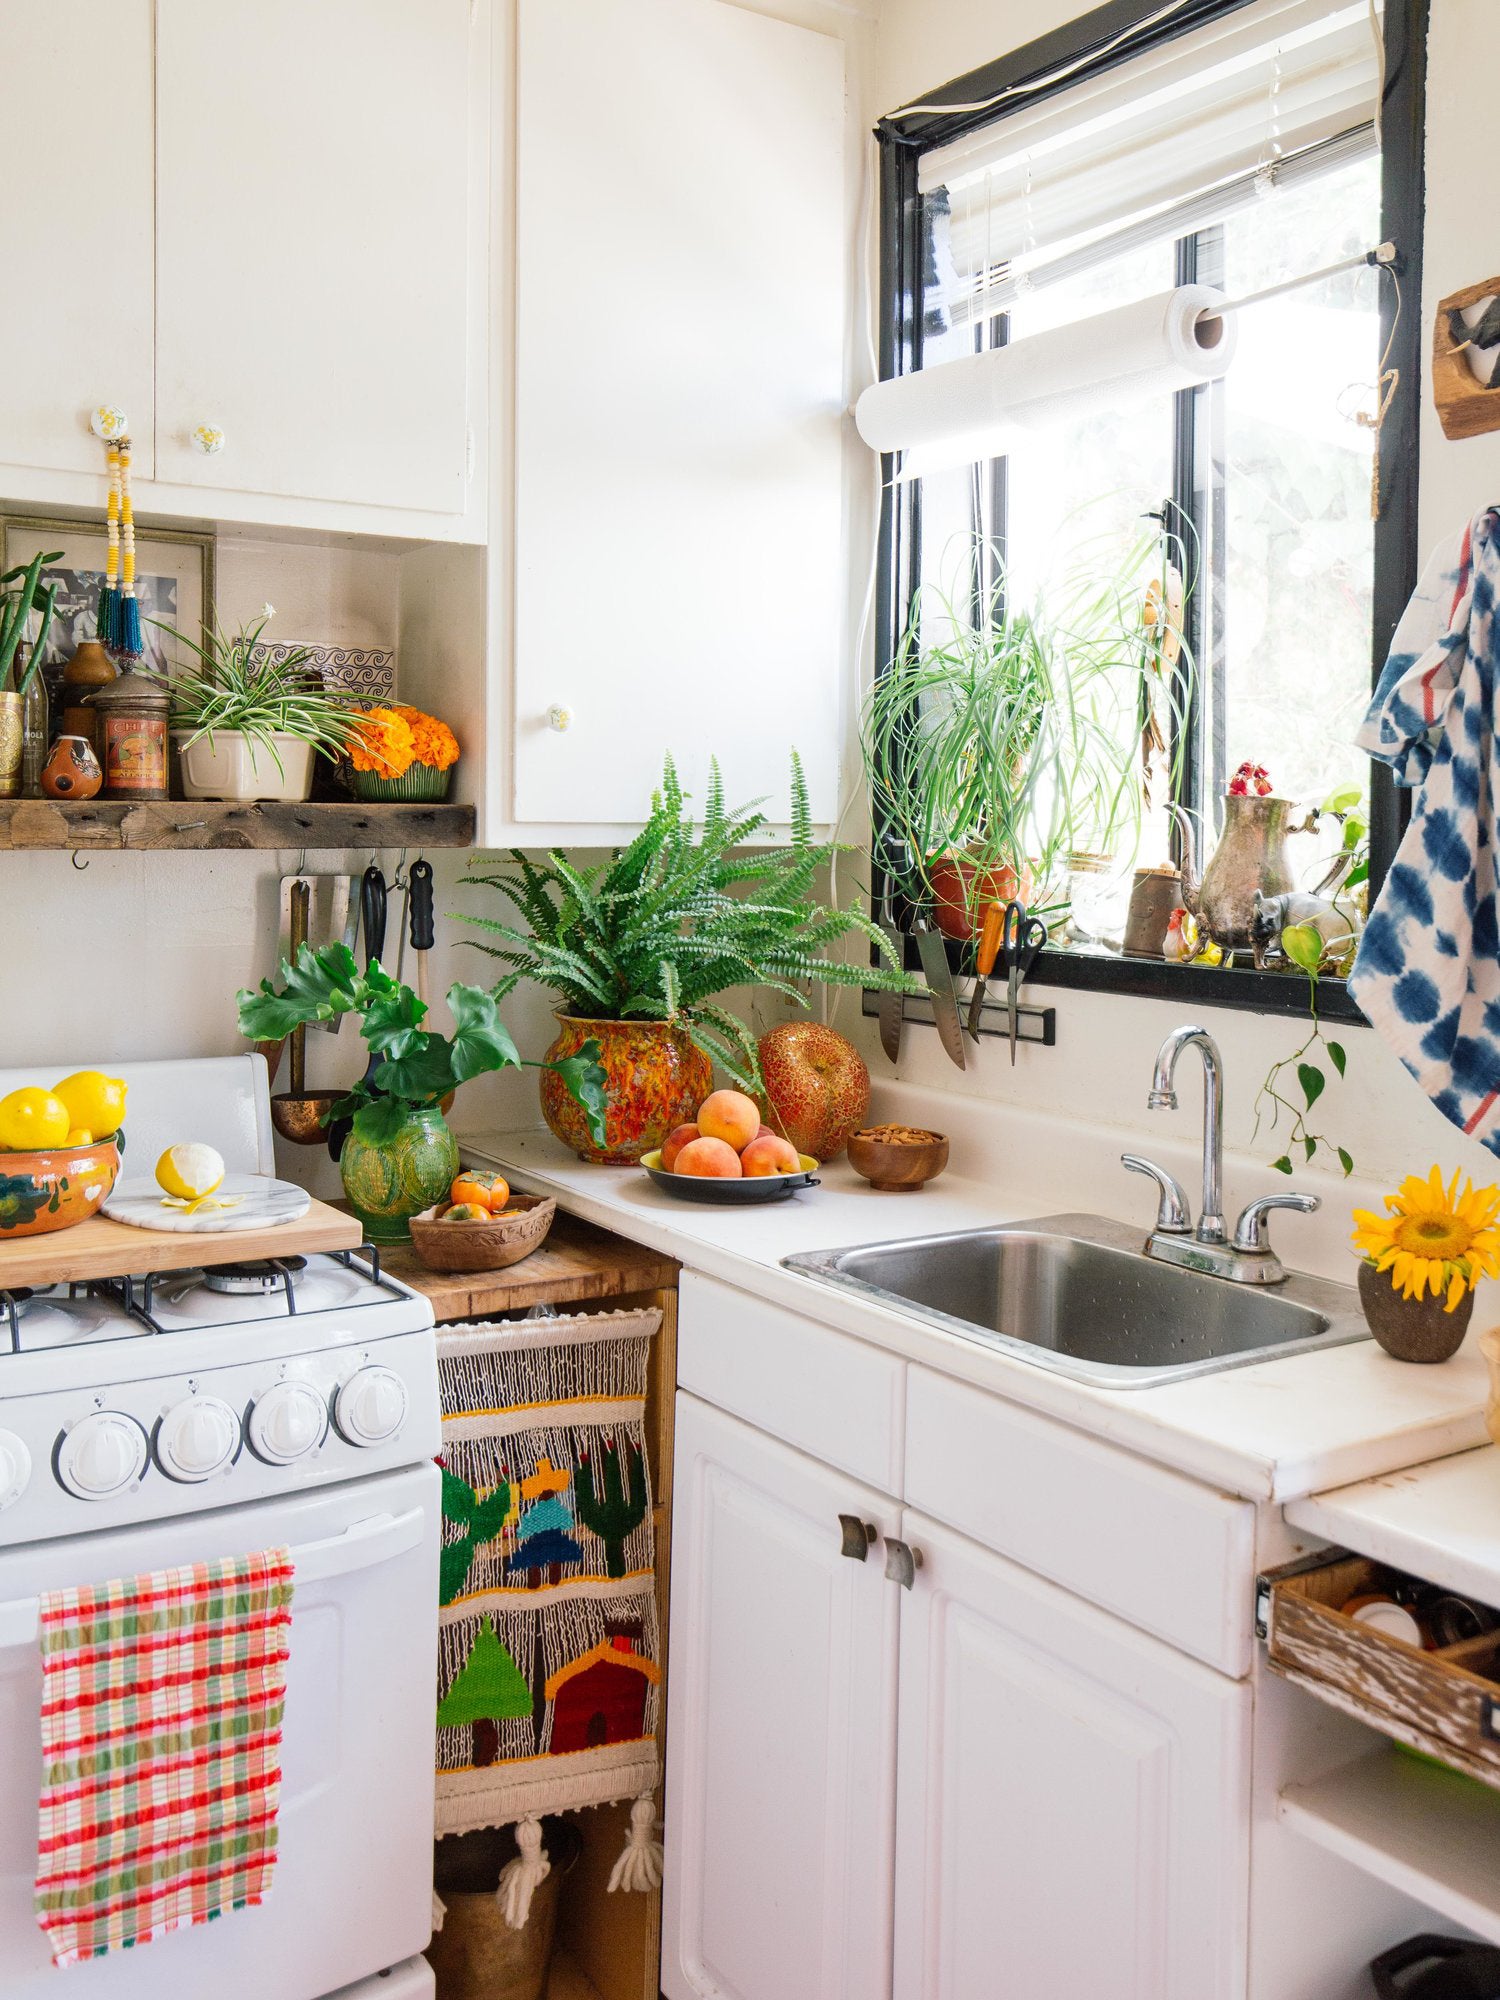 8 Tiny House Kitchen Ideas To Help You Make the Most of Your Small Space